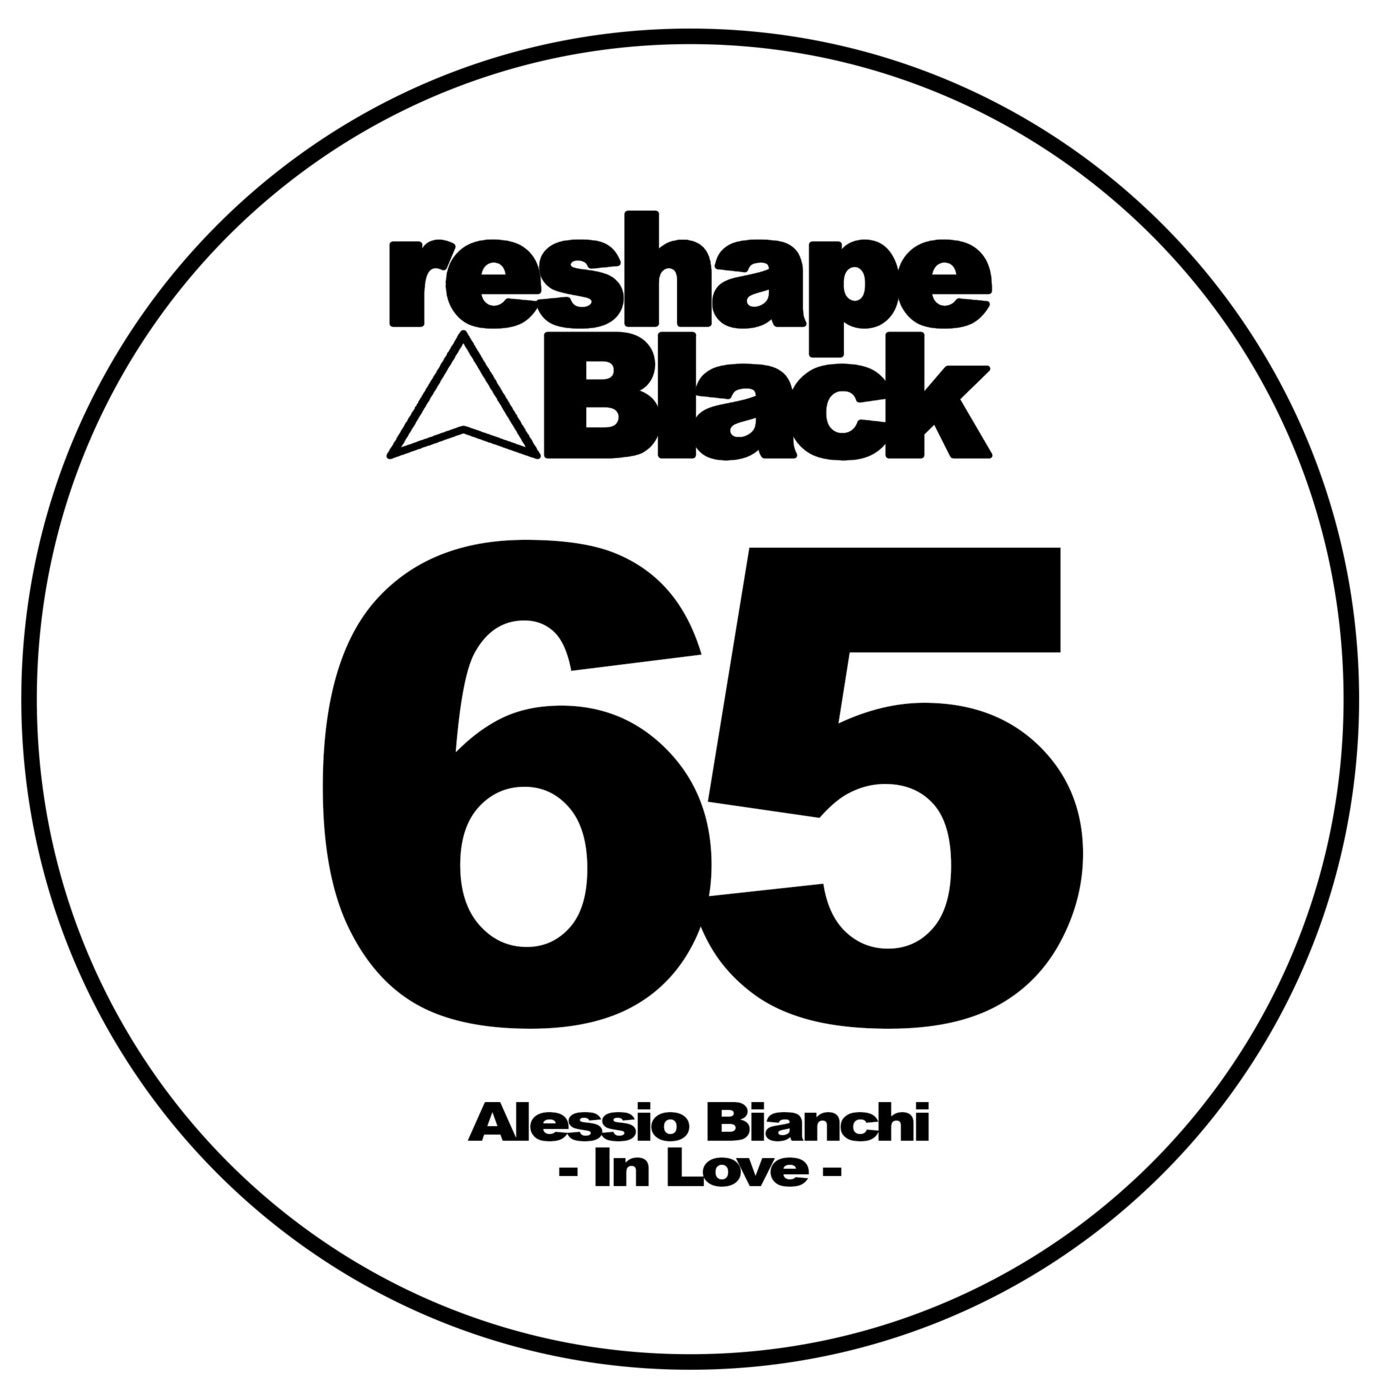 Alessio Bianchi - In Love [RB65]